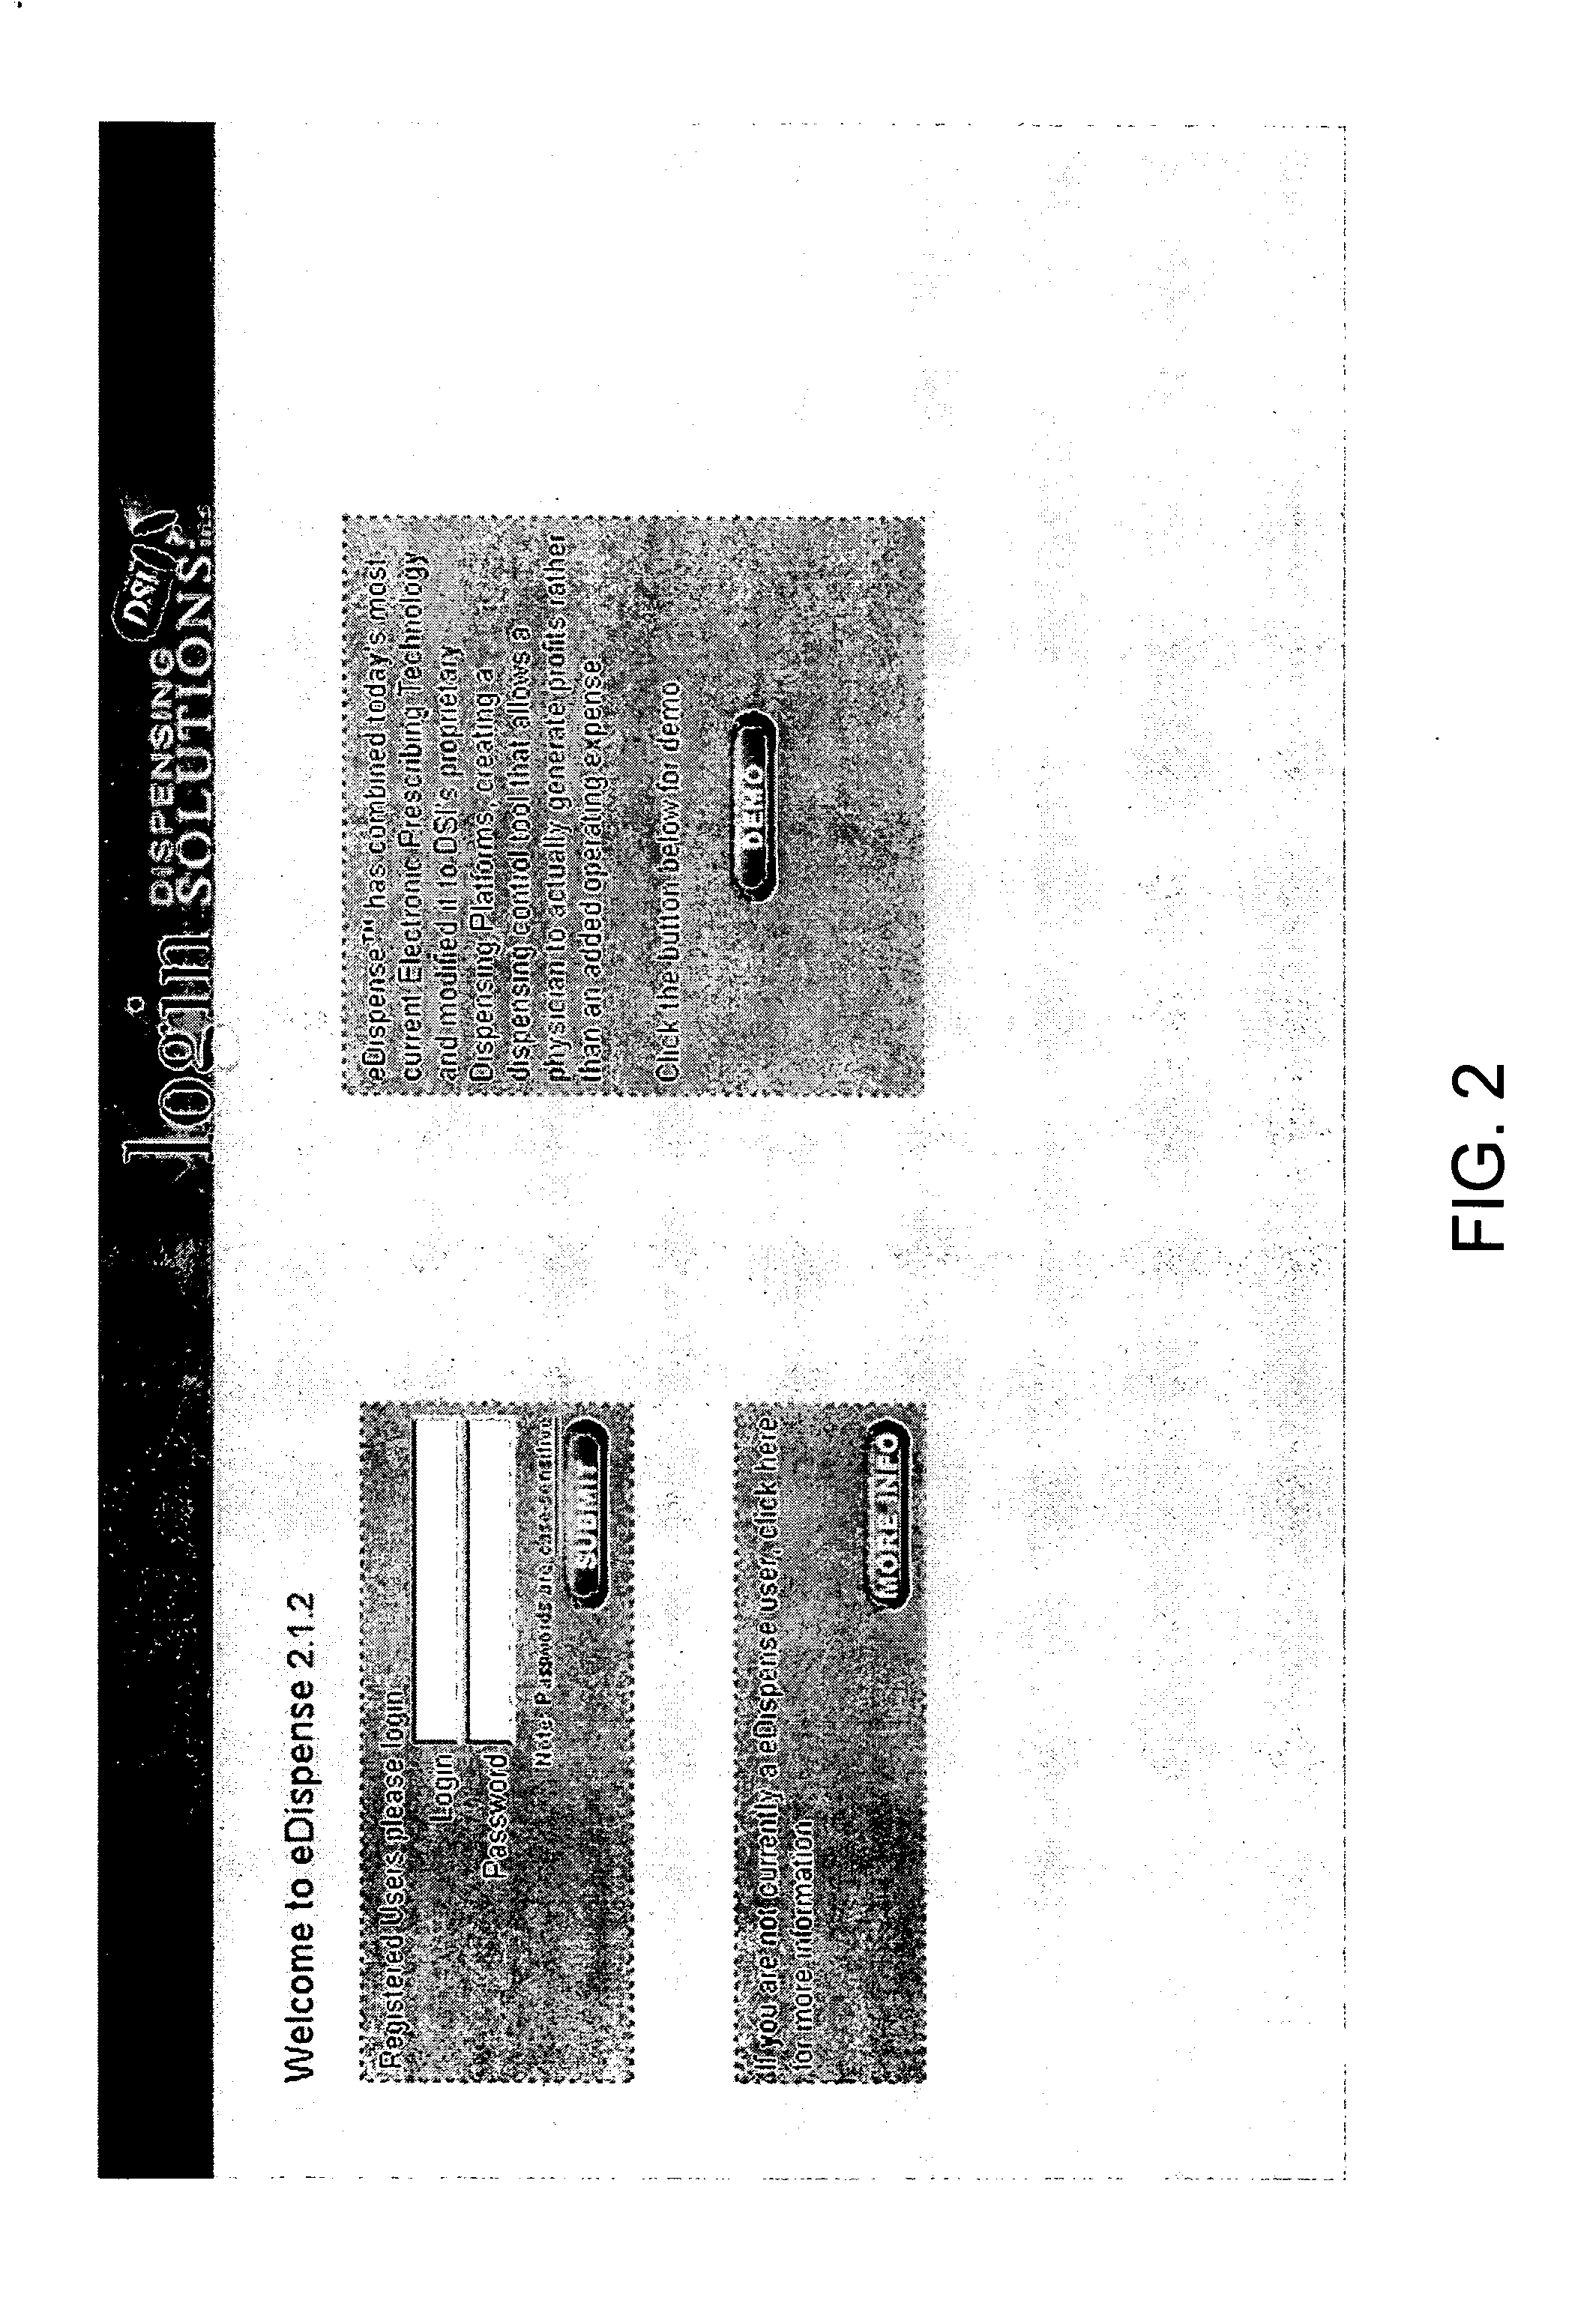 Dispensing system with real time inventory management